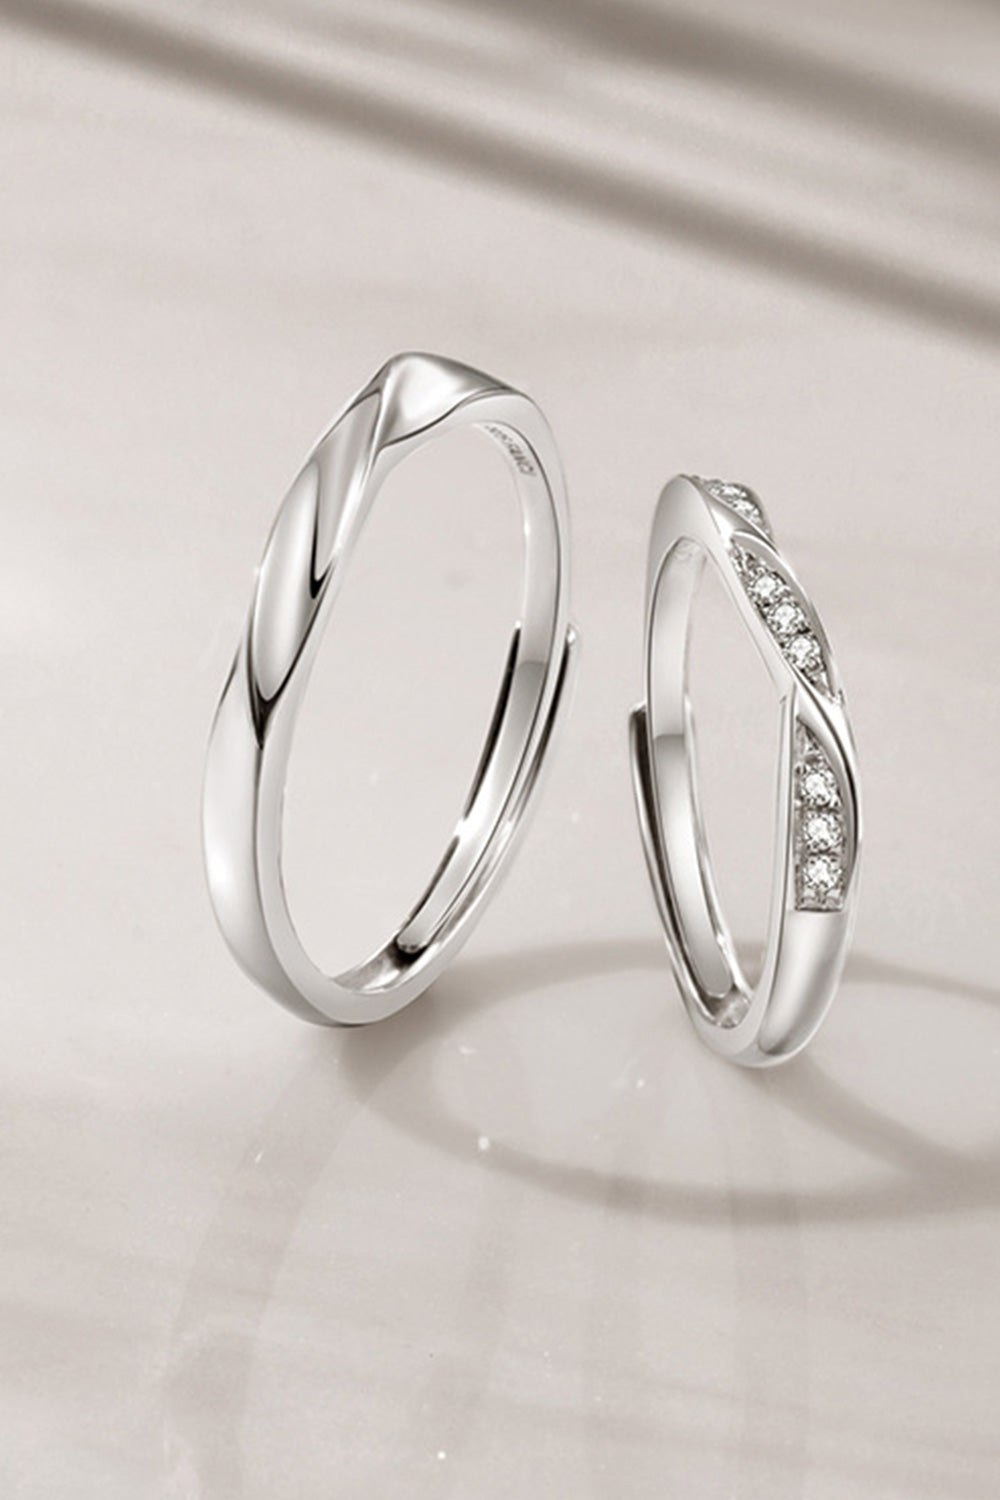 Valentine's Day rings-Embrace Togetherness